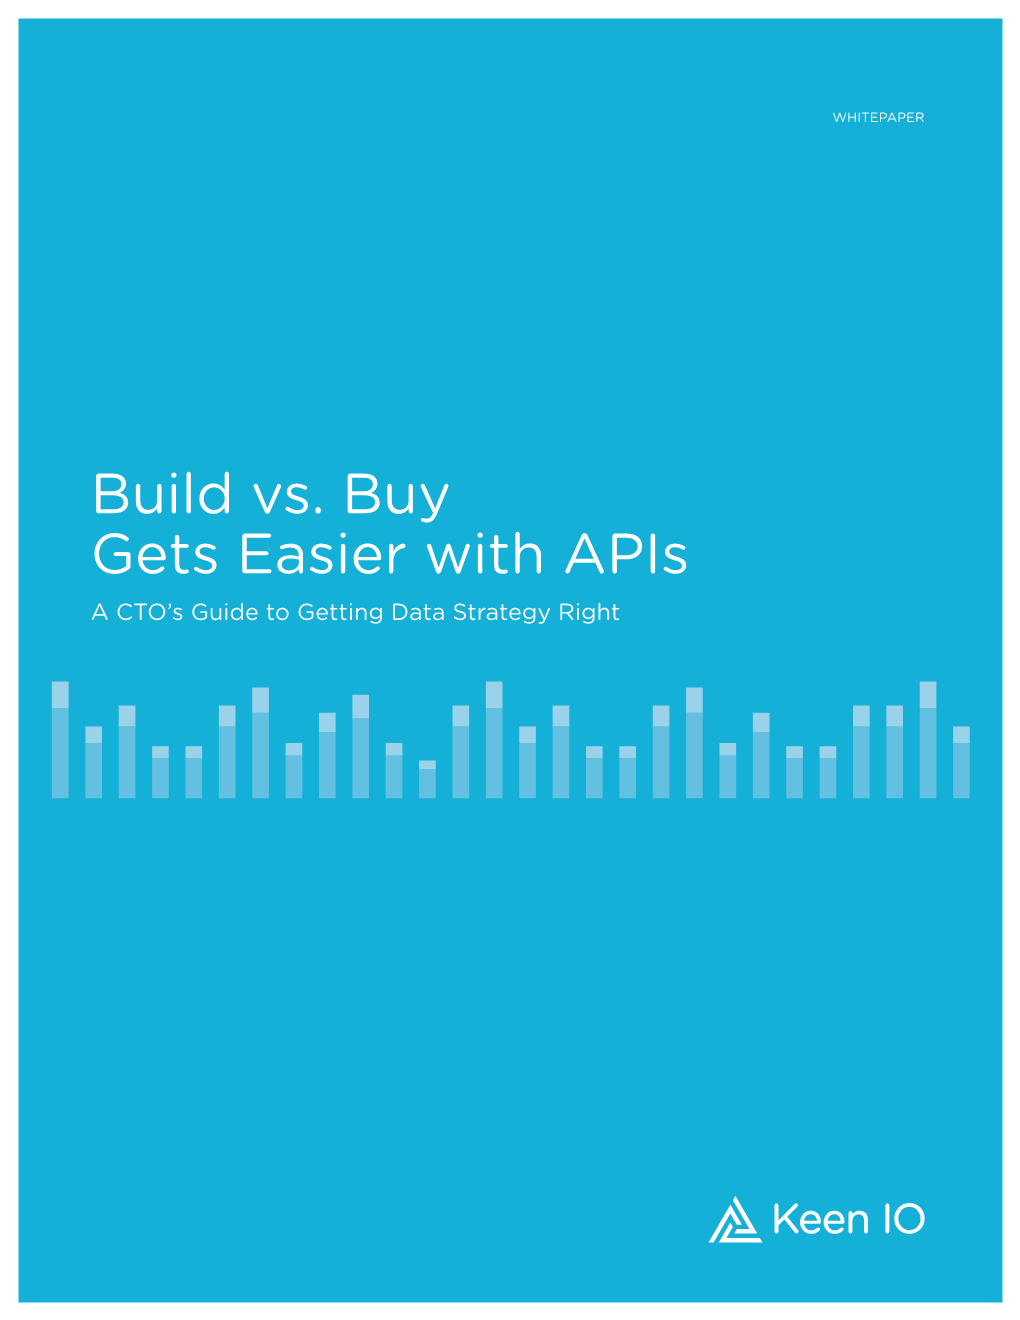 Build Vs. Buy Gets Easier with Apis a CTO’S Guide to Getting Data Strategy Right WHITEPAPER